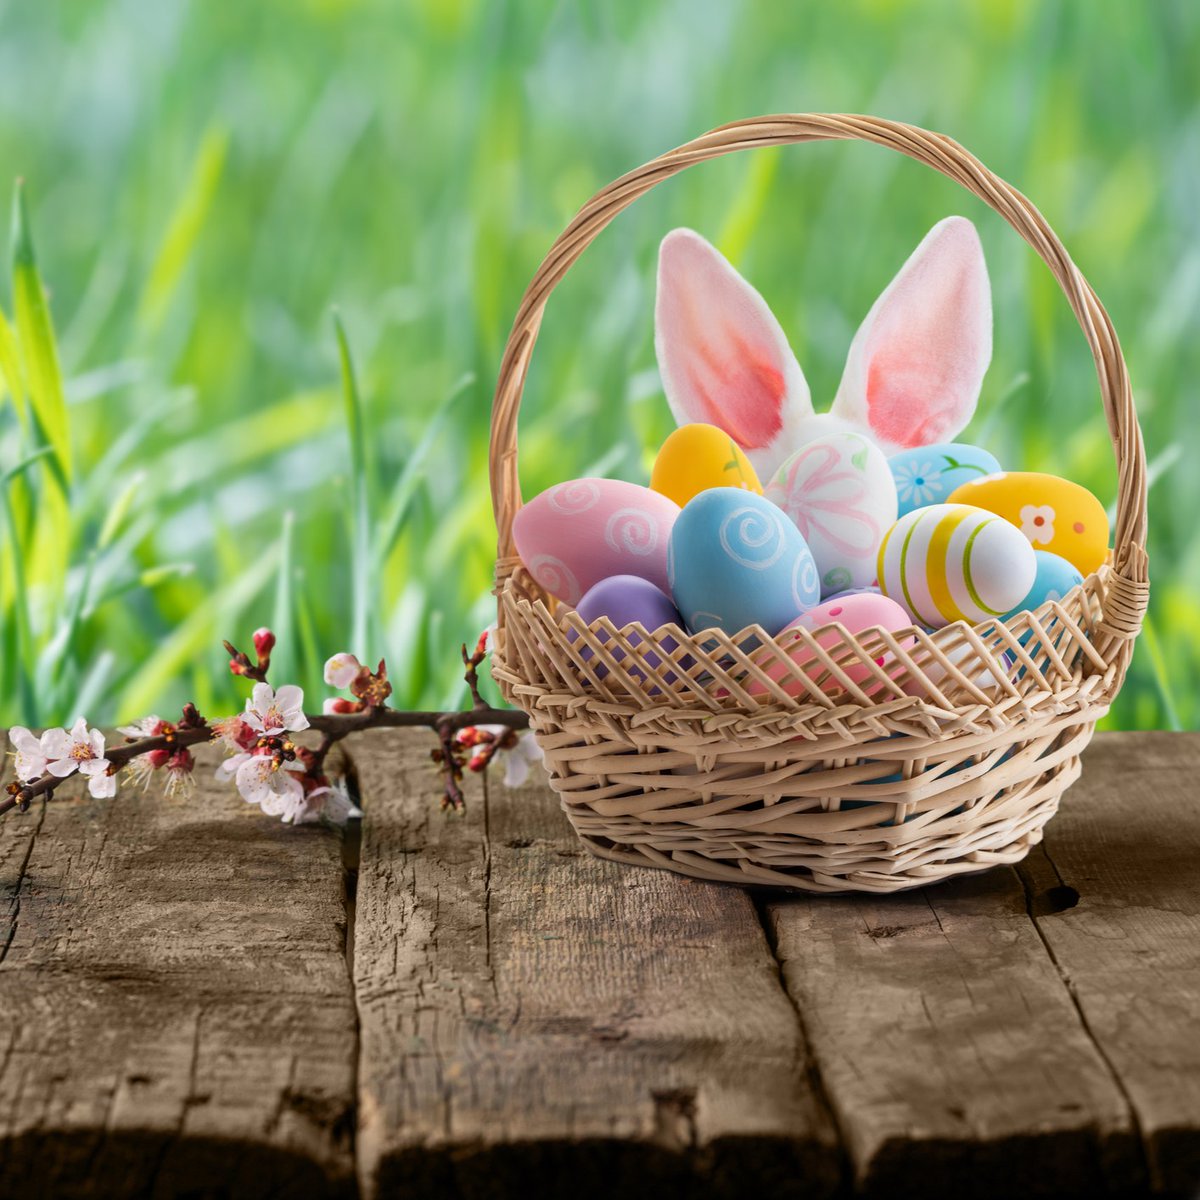 Happy Easter to all who celebrate! May your day be filled with joy.